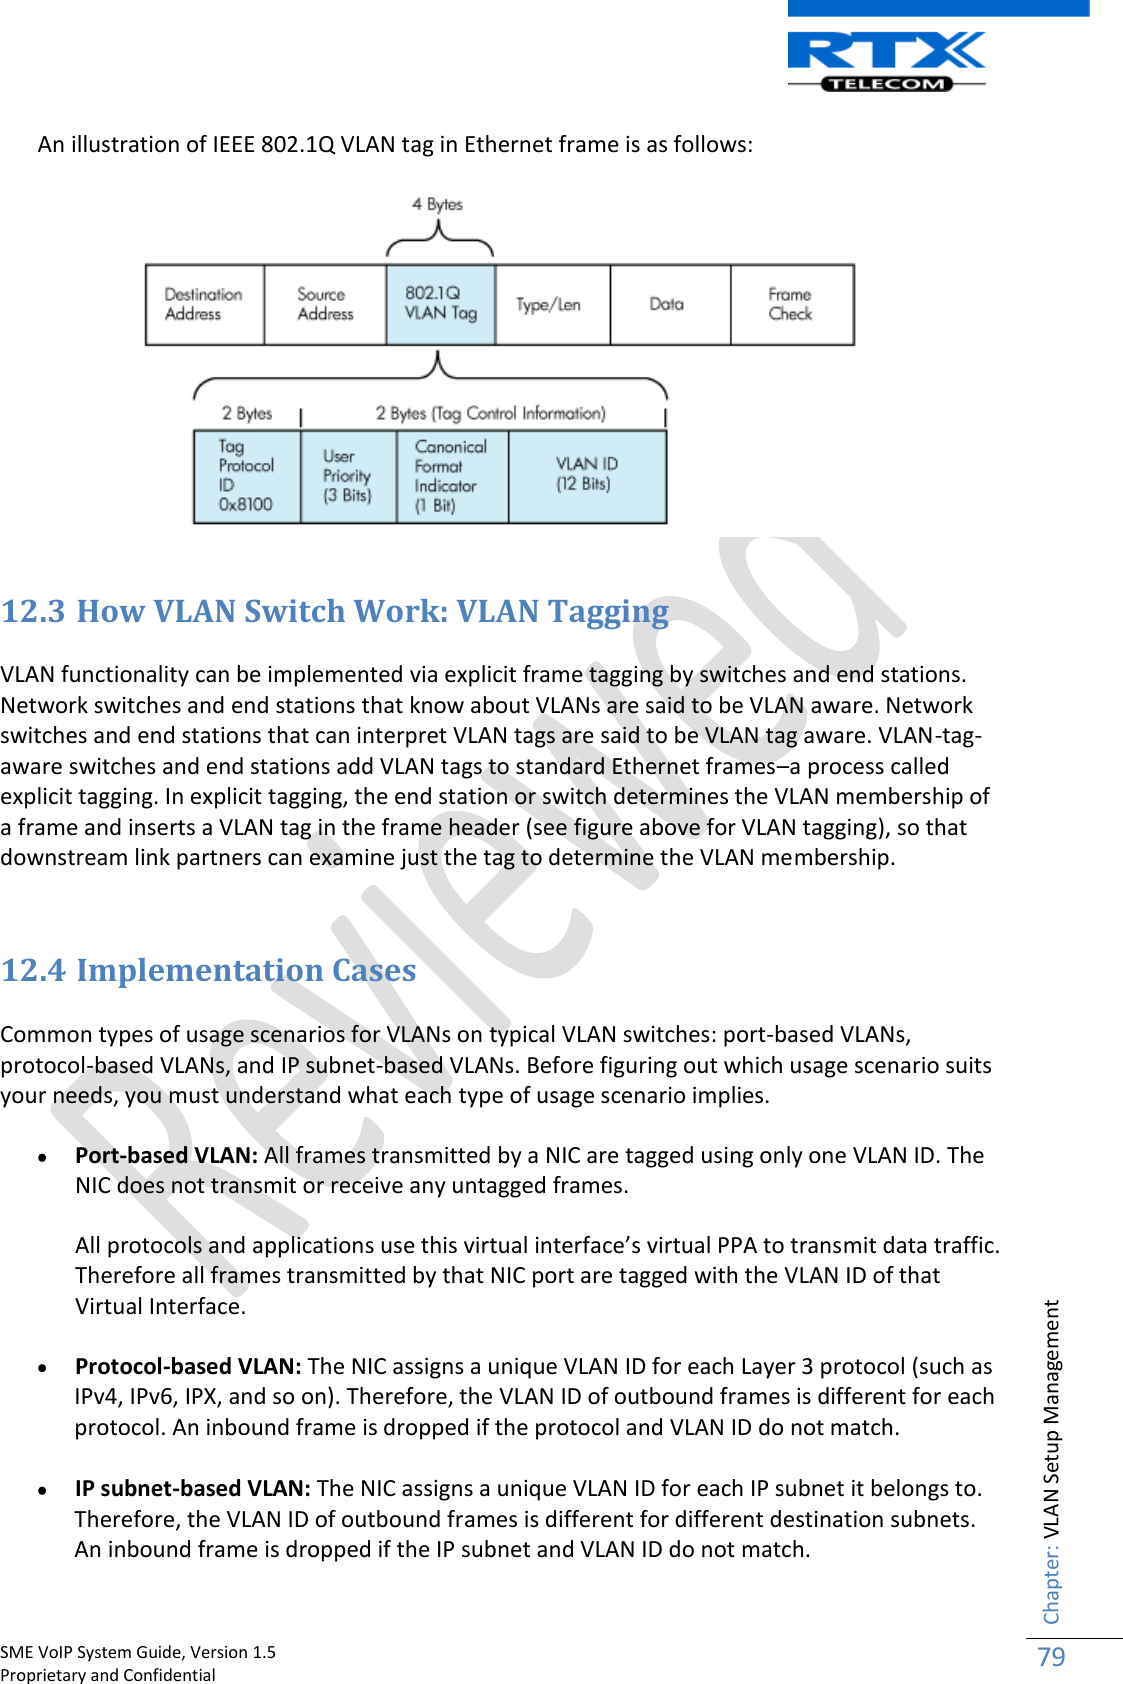    SME VoIP System Guide, Version 1.5                                                                                                                                                          Proprietary and Confidential    Chapter: VLAN Setup Management 79  An illustration of IEEE 802.1Q VLAN tag in Ethernet frame is as follows:   12.3 How VLAN Switch Work: VLAN Tagging  VLAN functionality can be implemented via explicit frame tagging by switches and end stations. Network switches and end stations that know about VLANs are said to be VLAN aware. Network switches and end stations that can interpret VLAN tags are said to be VLAN tag aware. VLAN-tag-aware switches and end stations add VLAN tags to standard Ethernet frames–a process called explicit tagging. In explicit tagging, the end station or switch determines the VLAN membership of a frame and inserts a VLAN tag in the frame header (see figure above for VLAN tagging), so that downstream link partners can examine just the tag to determine the VLAN membership.  12.4 Implementation Cases  Common types of usage scenarios for VLANs on typical VLAN switches: port-based VLANs, protocol-based VLANs, and IP subnet-based VLANs. Before figuring out which usage scenario suits your needs, you must understand what each type of usage scenario implies.   Port-based VLAN: All frames transmitted by a NIC are tagged using only one VLAN ID. The NIC does not transmit or receive any untagged frames. All protocols and applications use this virtual interface’s virtual PPA to transmit data traffic. Therefore all frames transmitted by that NIC port are tagged with the VLAN ID of that Virtual Interface.  Protocol-based VLAN: The NIC assigns a unique VLAN ID for each Layer 3 protocol (such as IPv4, IPv6, IPX, and so on). Therefore, the VLAN ID of outbound frames is different for each protocol. An inbound frame is dropped if the protocol and VLAN ID do not match.   IP subnet-based VLAN: The NIC assigns a unique VLAN ID for each IP subnet it belongs to. Therefore, the VLAN ID of outbound frames is different for different destination subnets. An inbound frame is dropped if the IP subnet and VLAN ID do not match.  